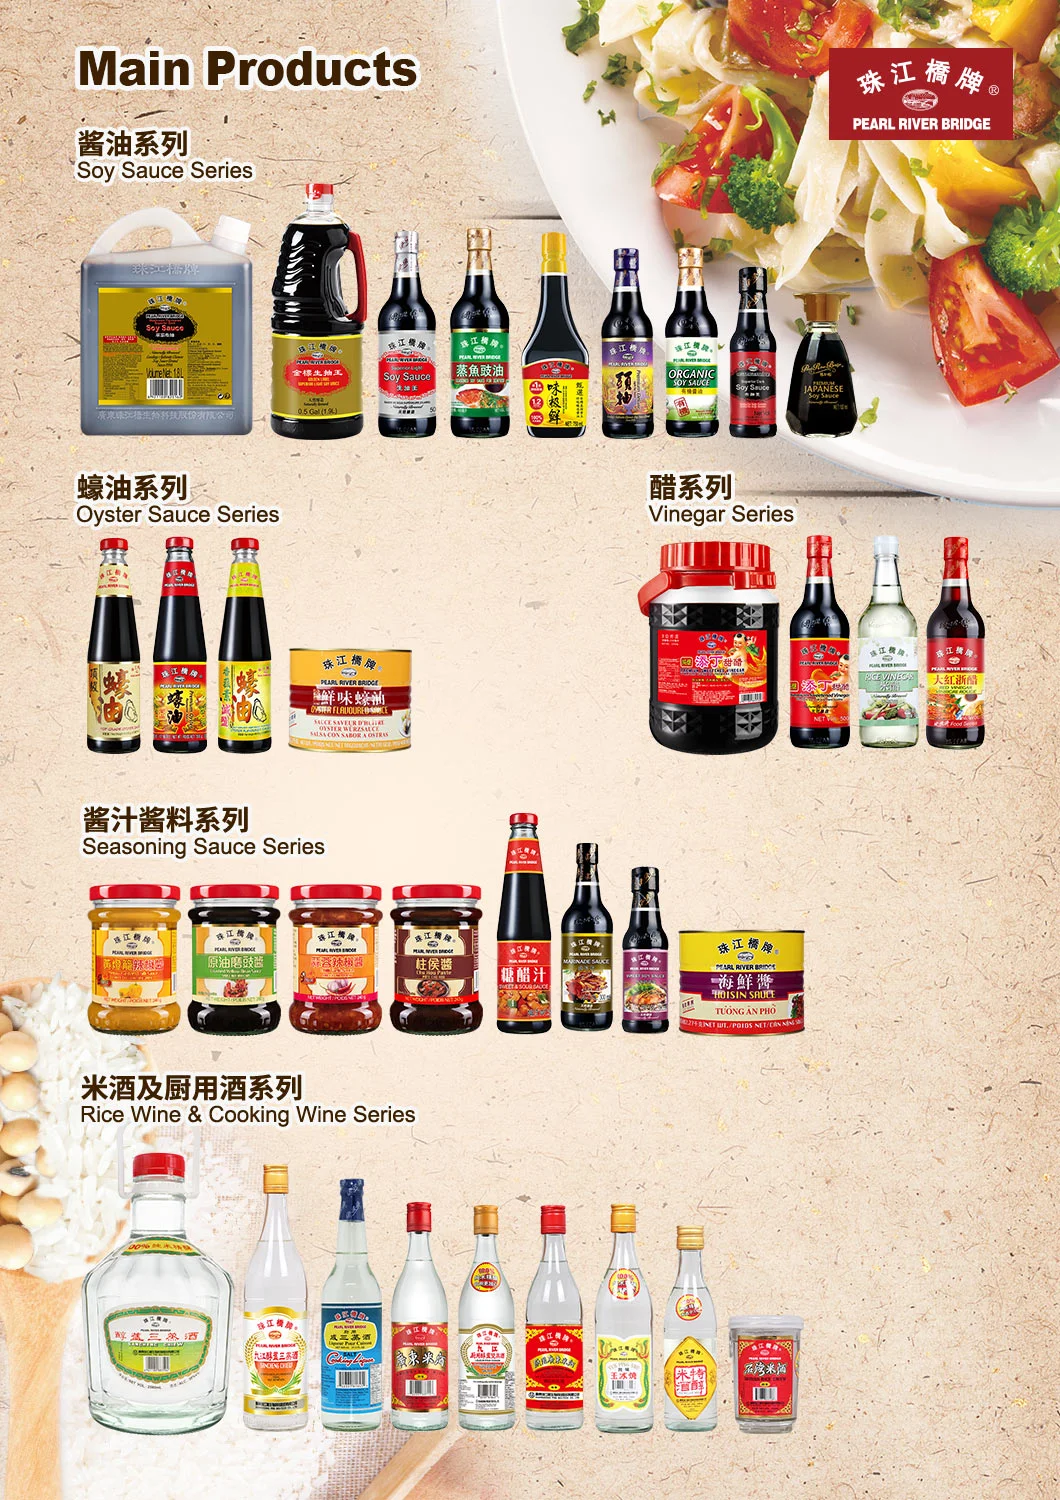 Pearl River Bridge (the Leading Soy Sauce Brand) Premium Delicious Soy Sauce 370ml for Cooking Food